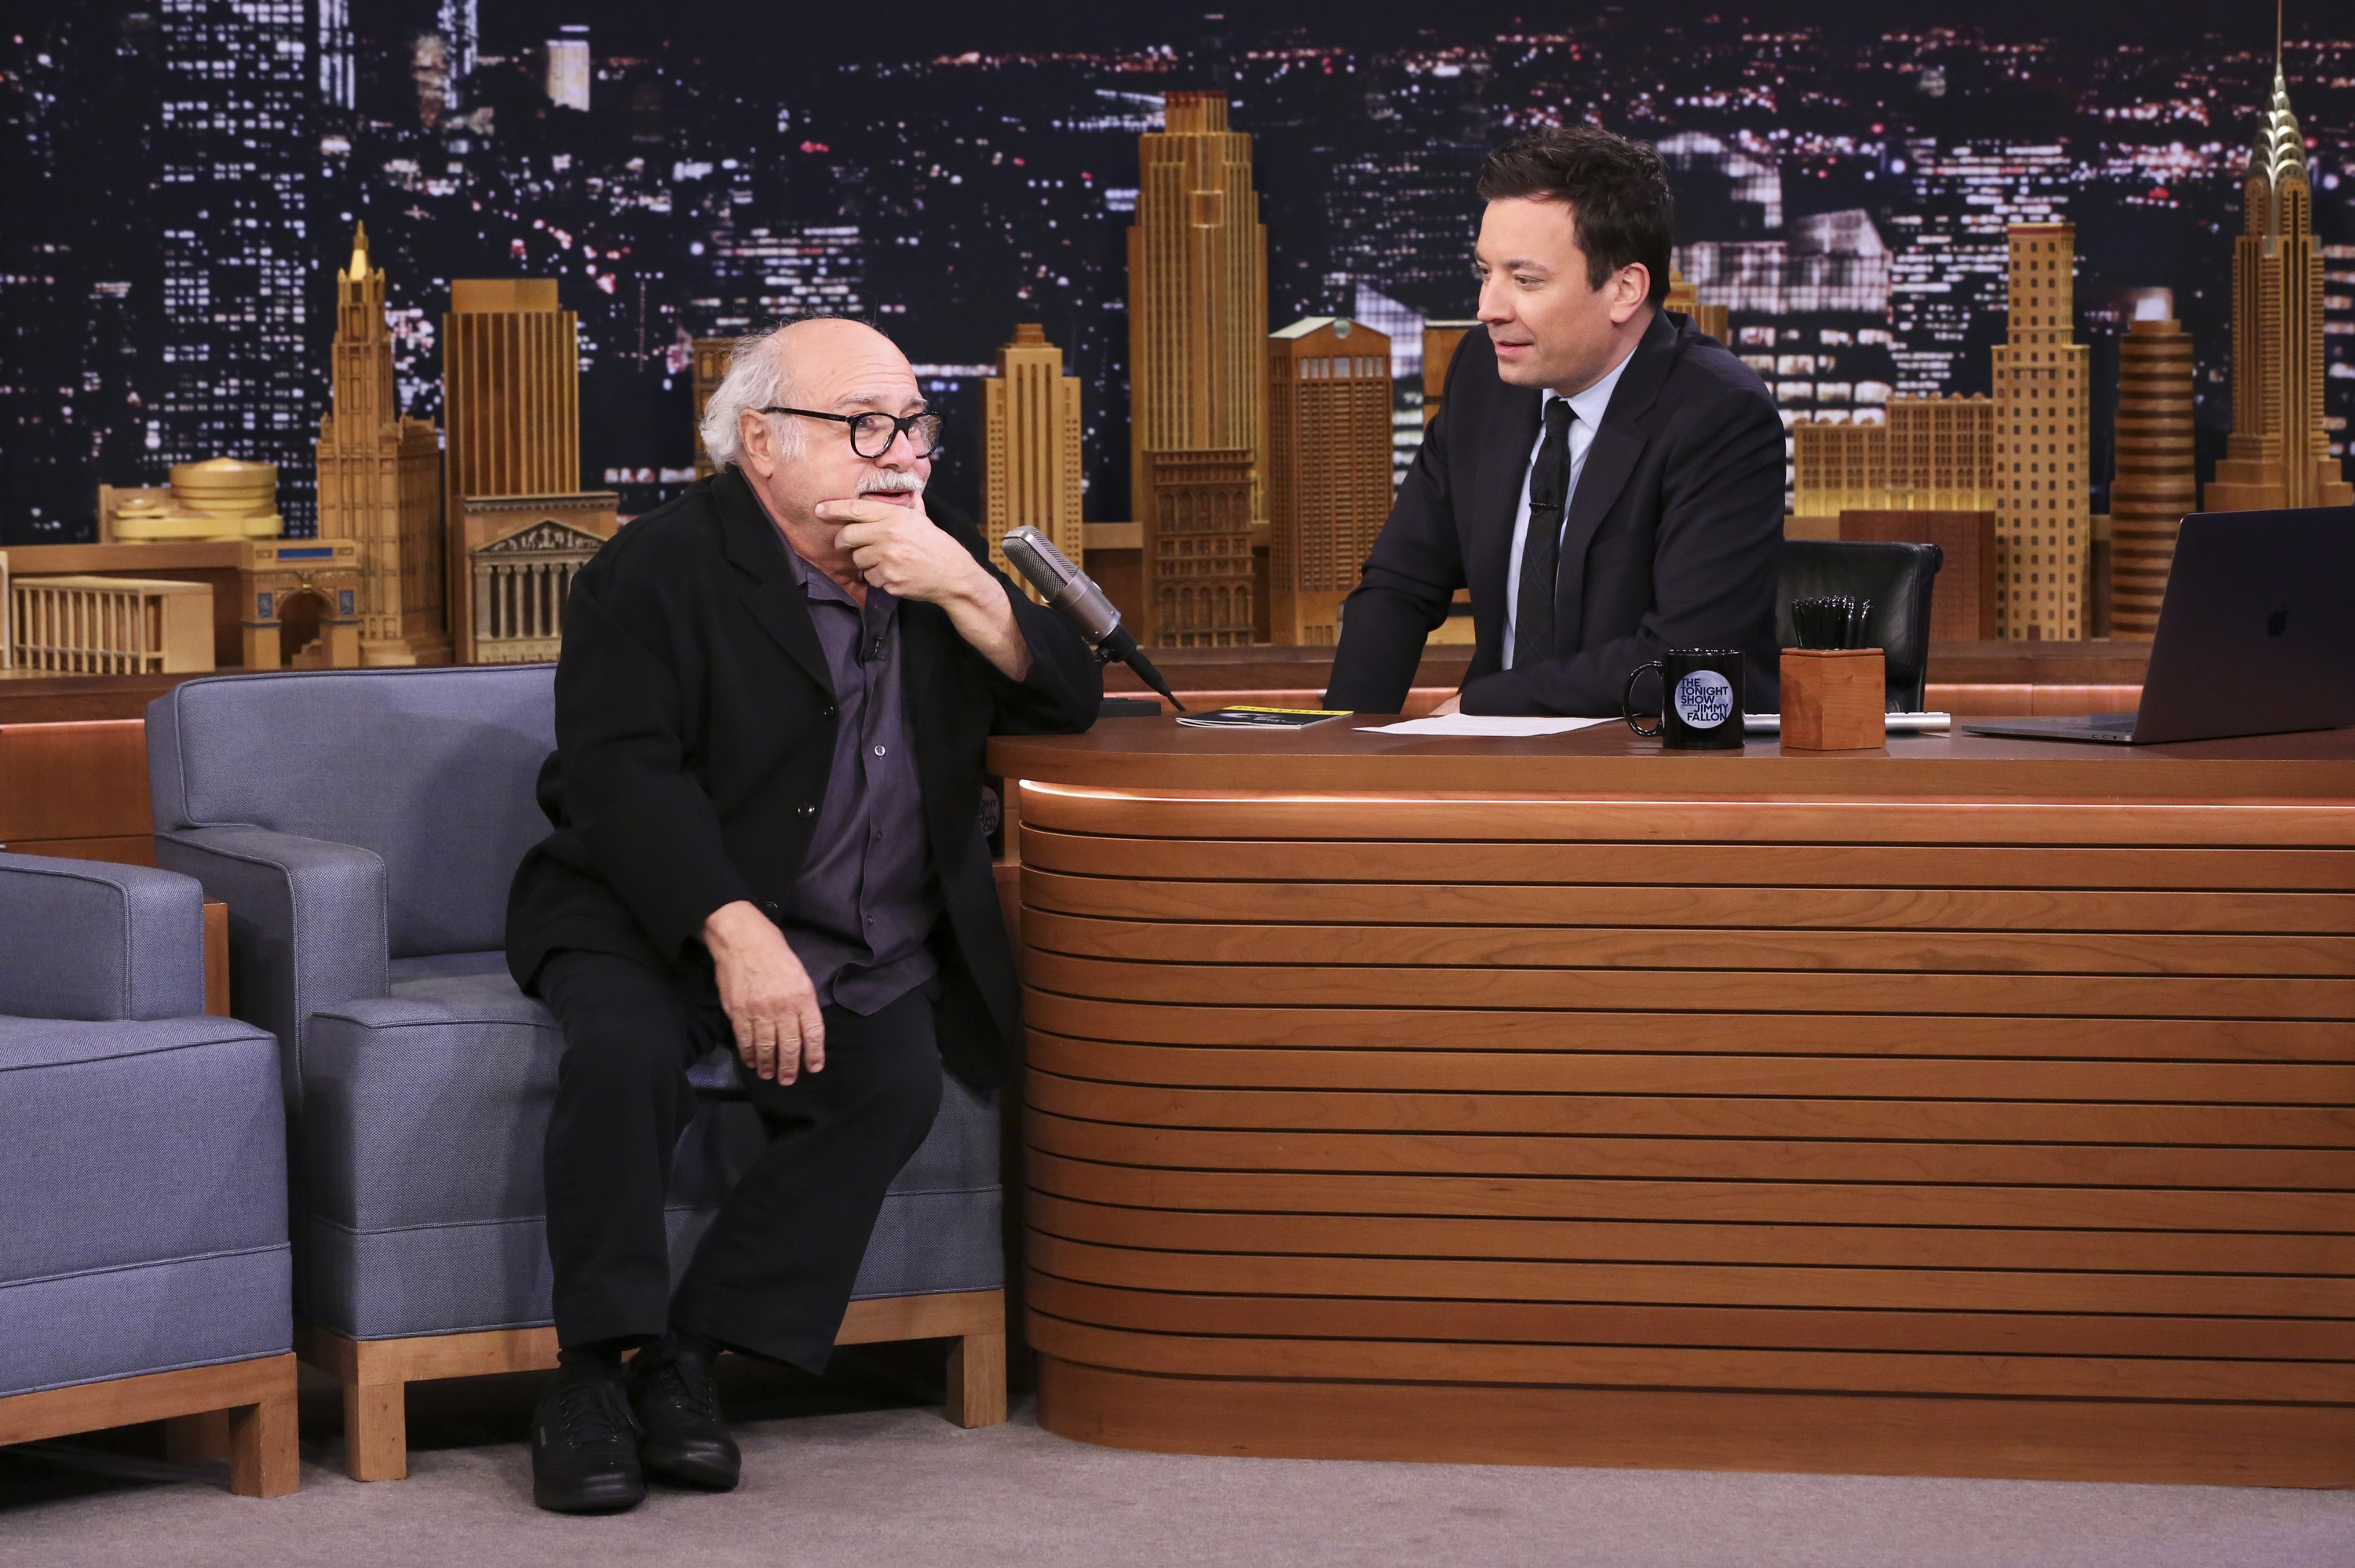 Danny Devito Coming Out Of A Couch